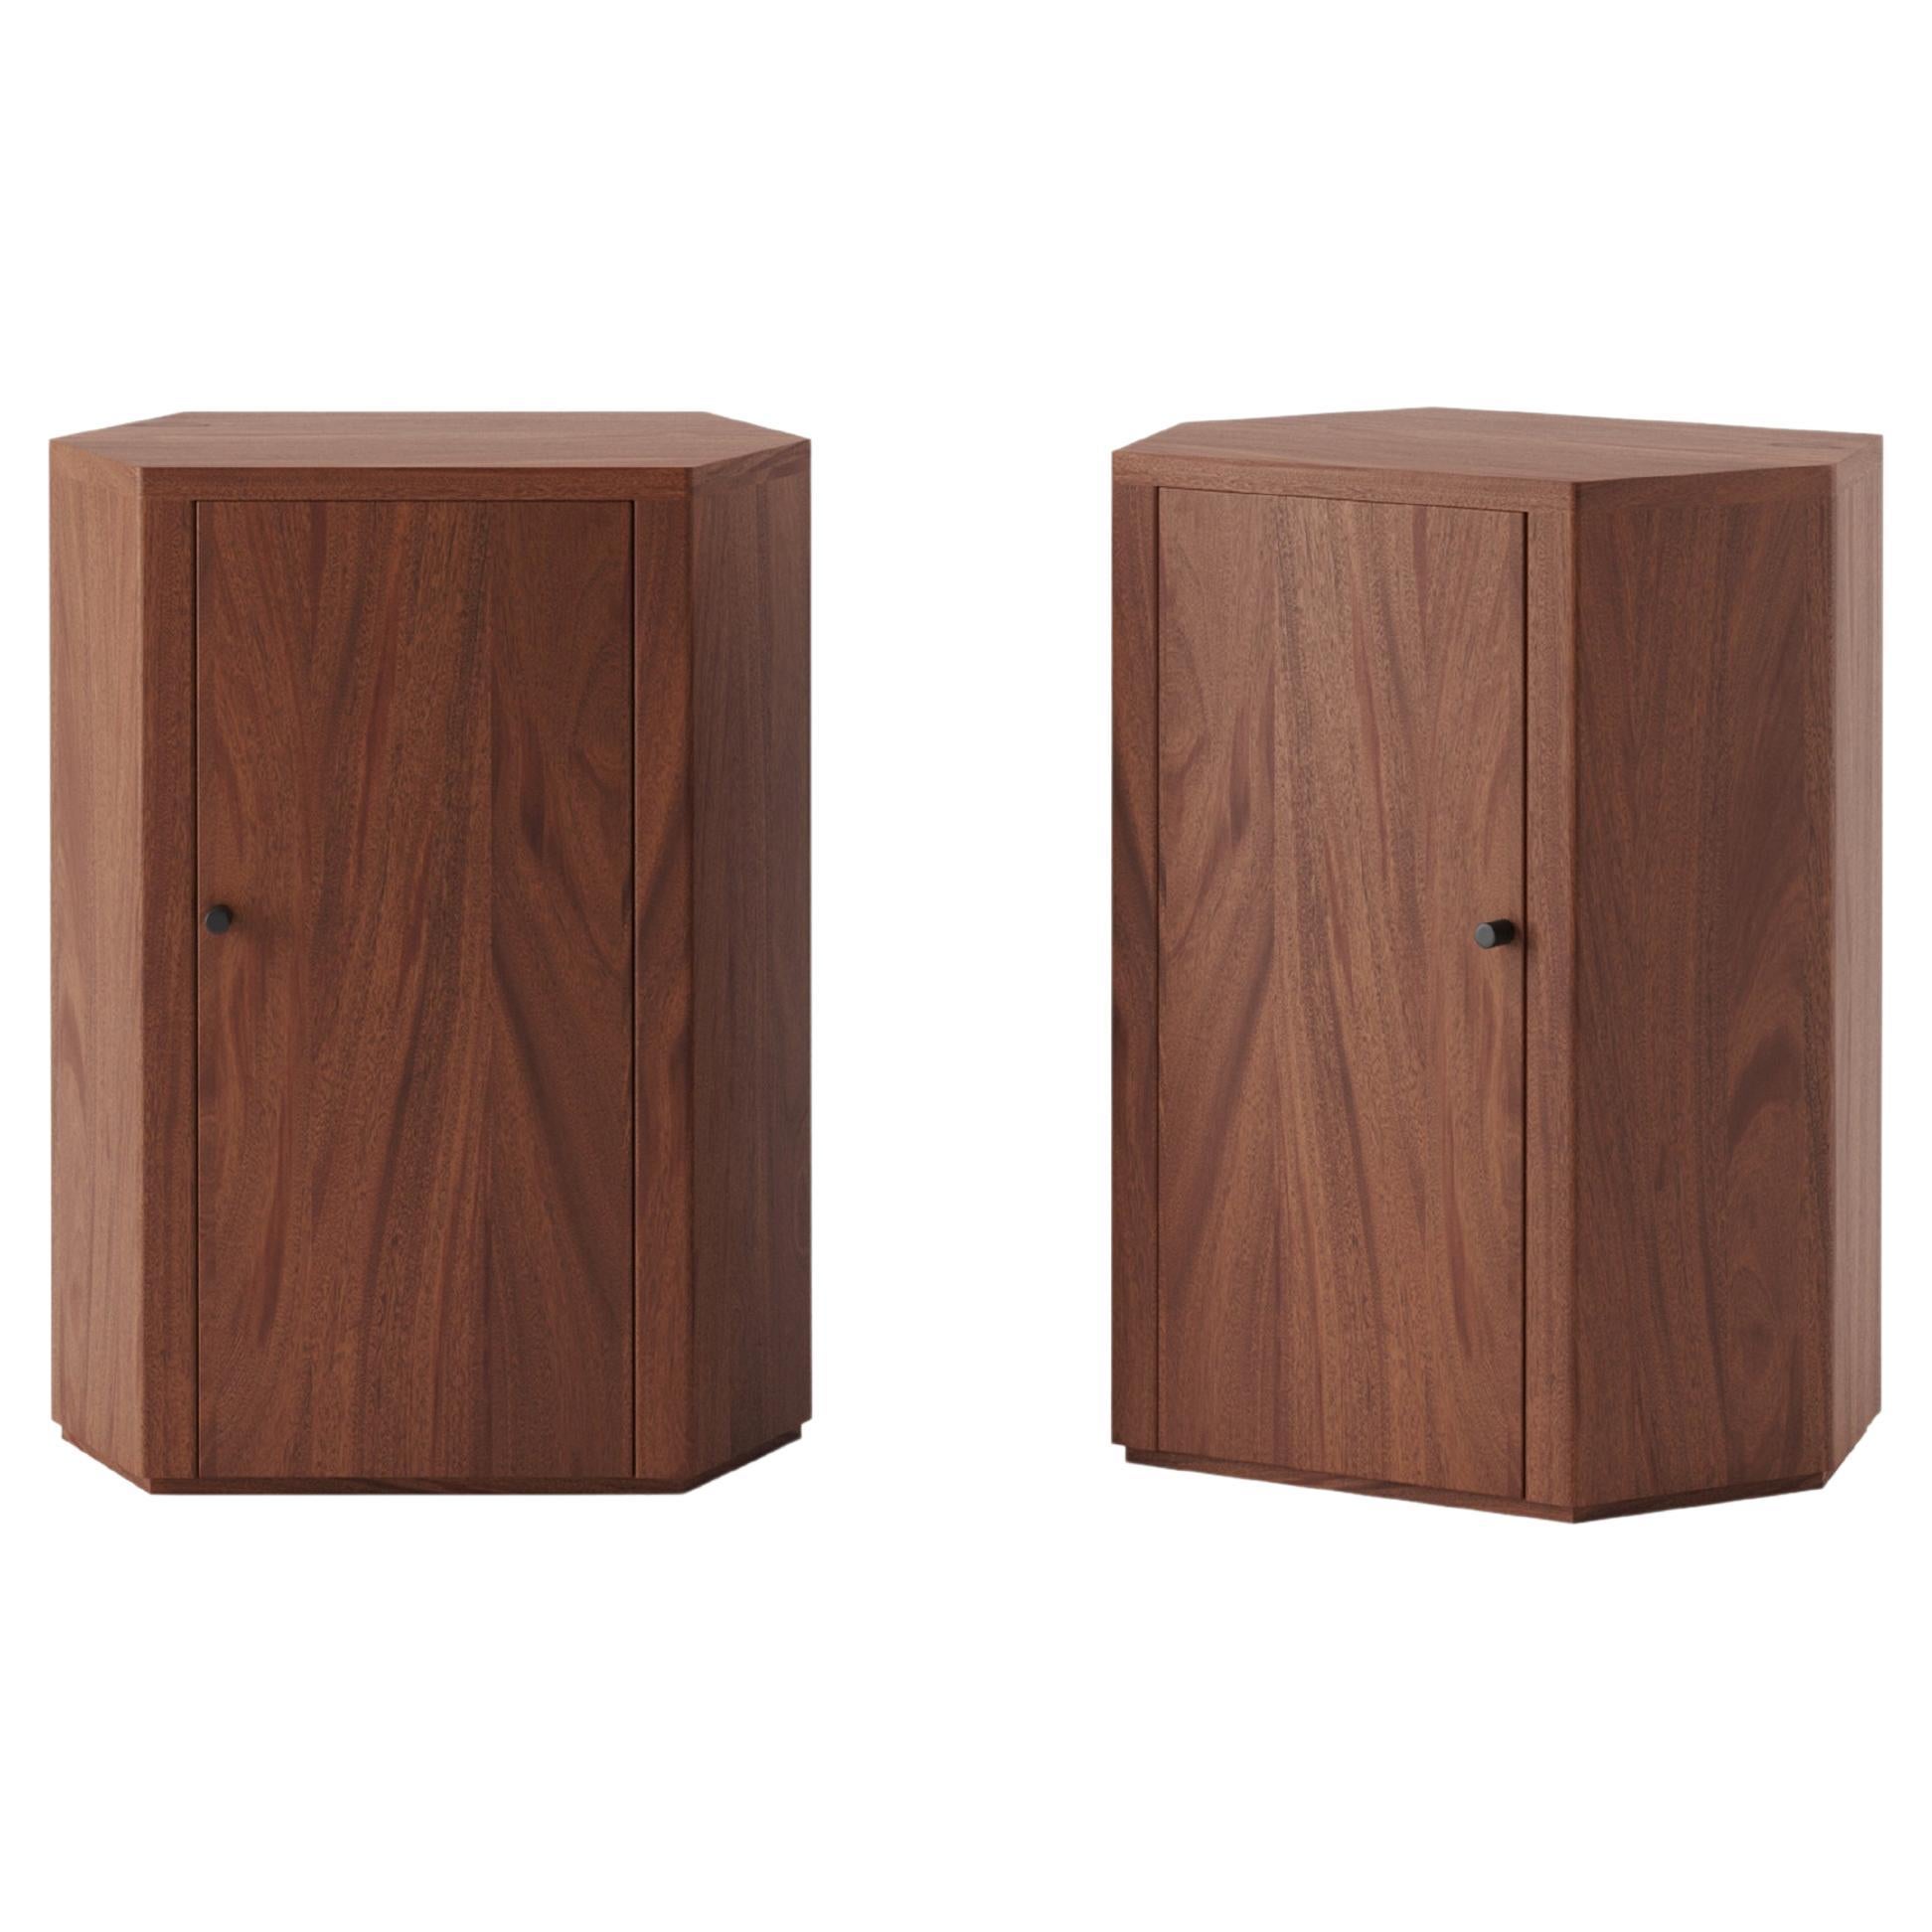 Pair of Park Night Stands in Oiled African Mahogany by Yaniv Chen for Lemon For Sale